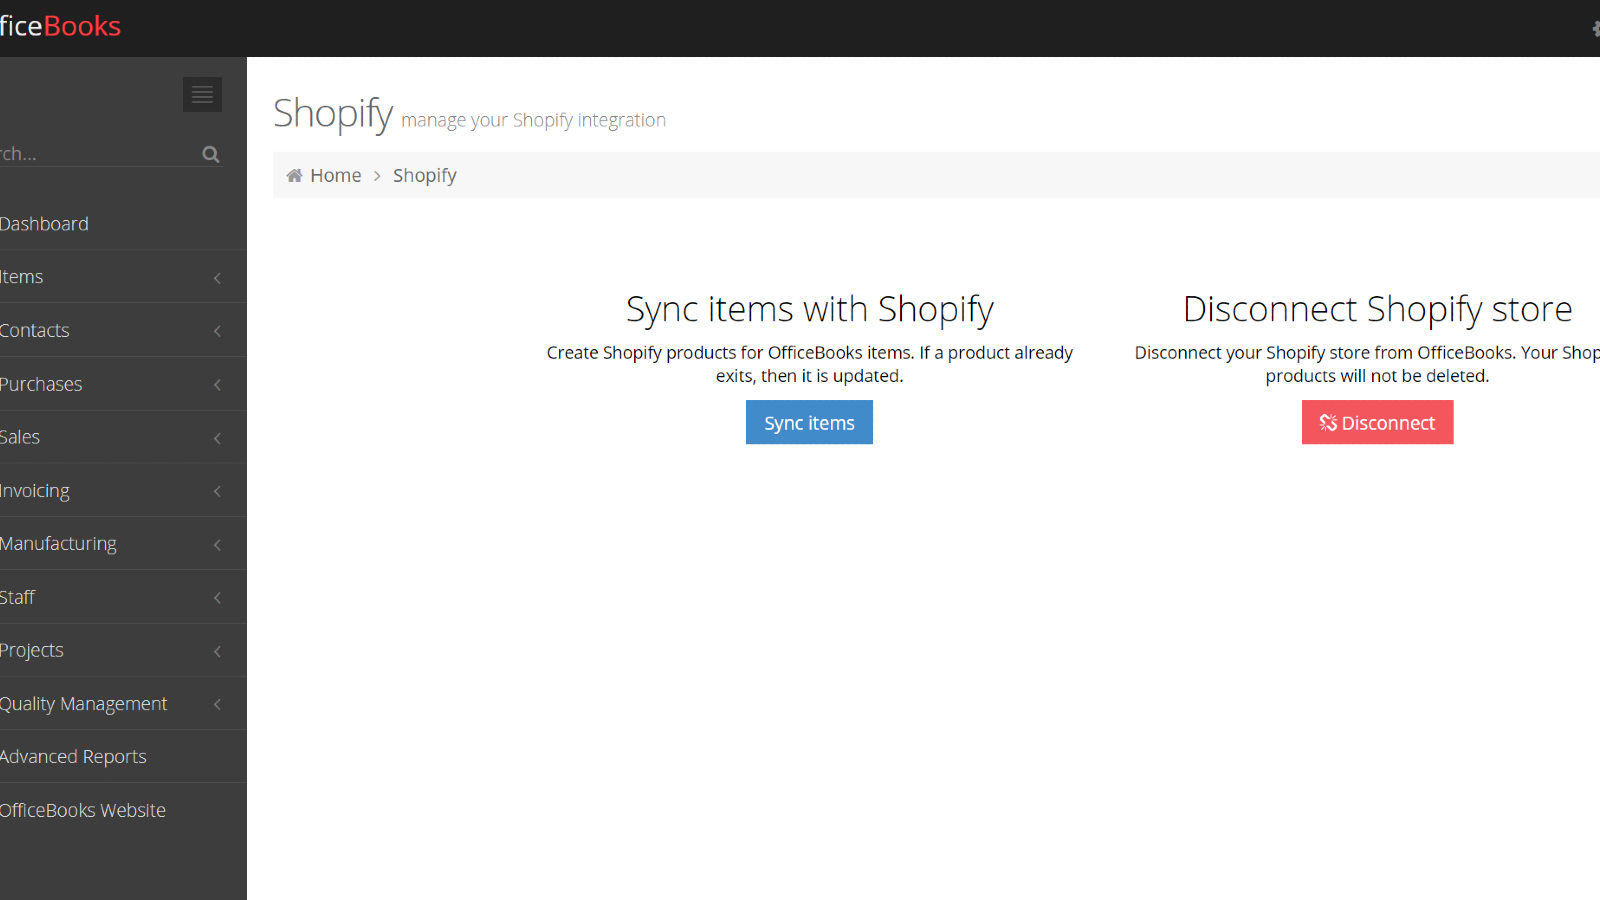 OfficeBooks Shopify sync page